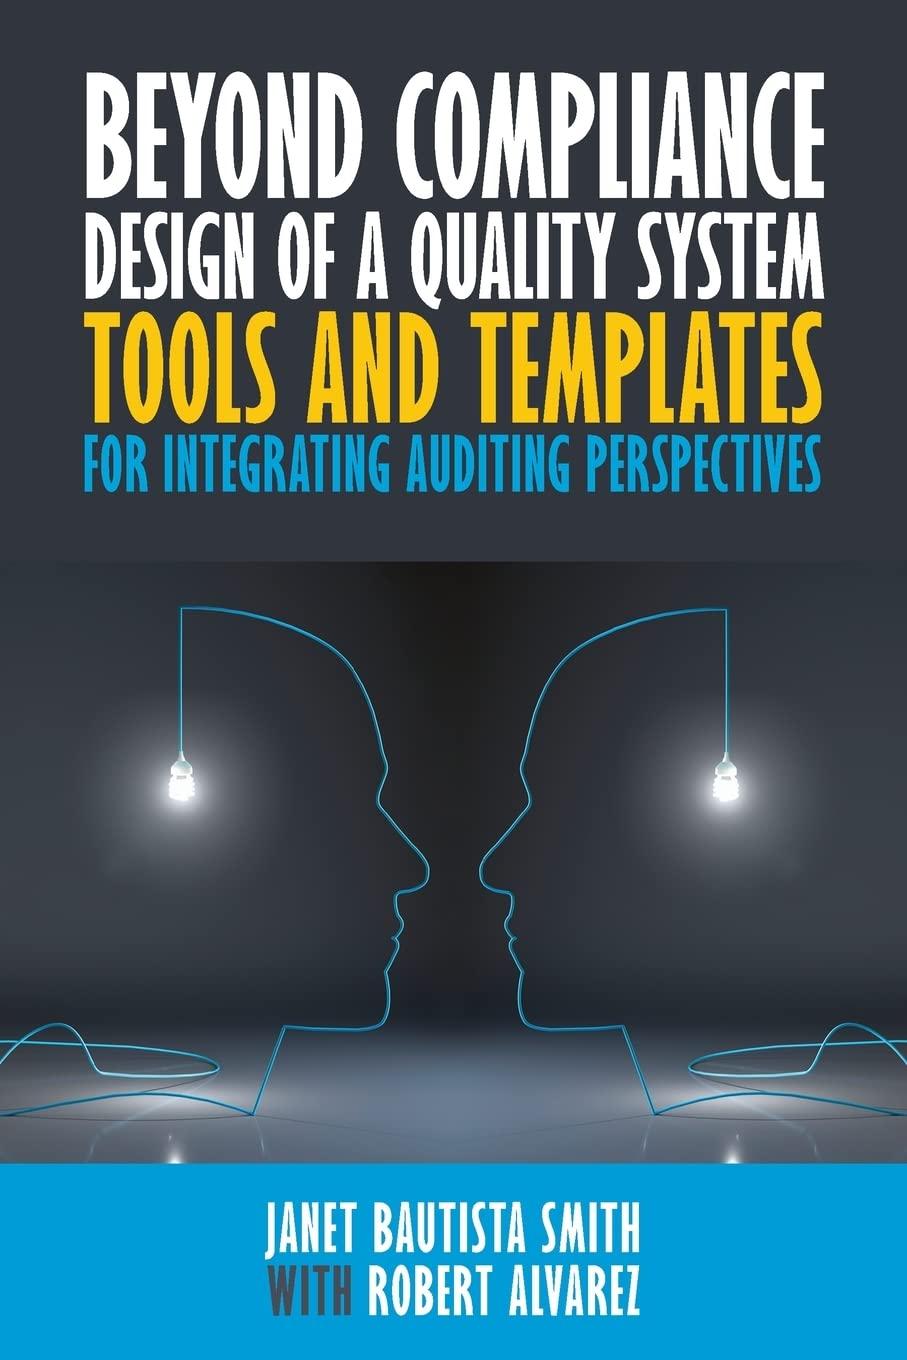 Beyond Compliance Design Of A Quality System Tools And Templates For Integrating Auditing Perspectives